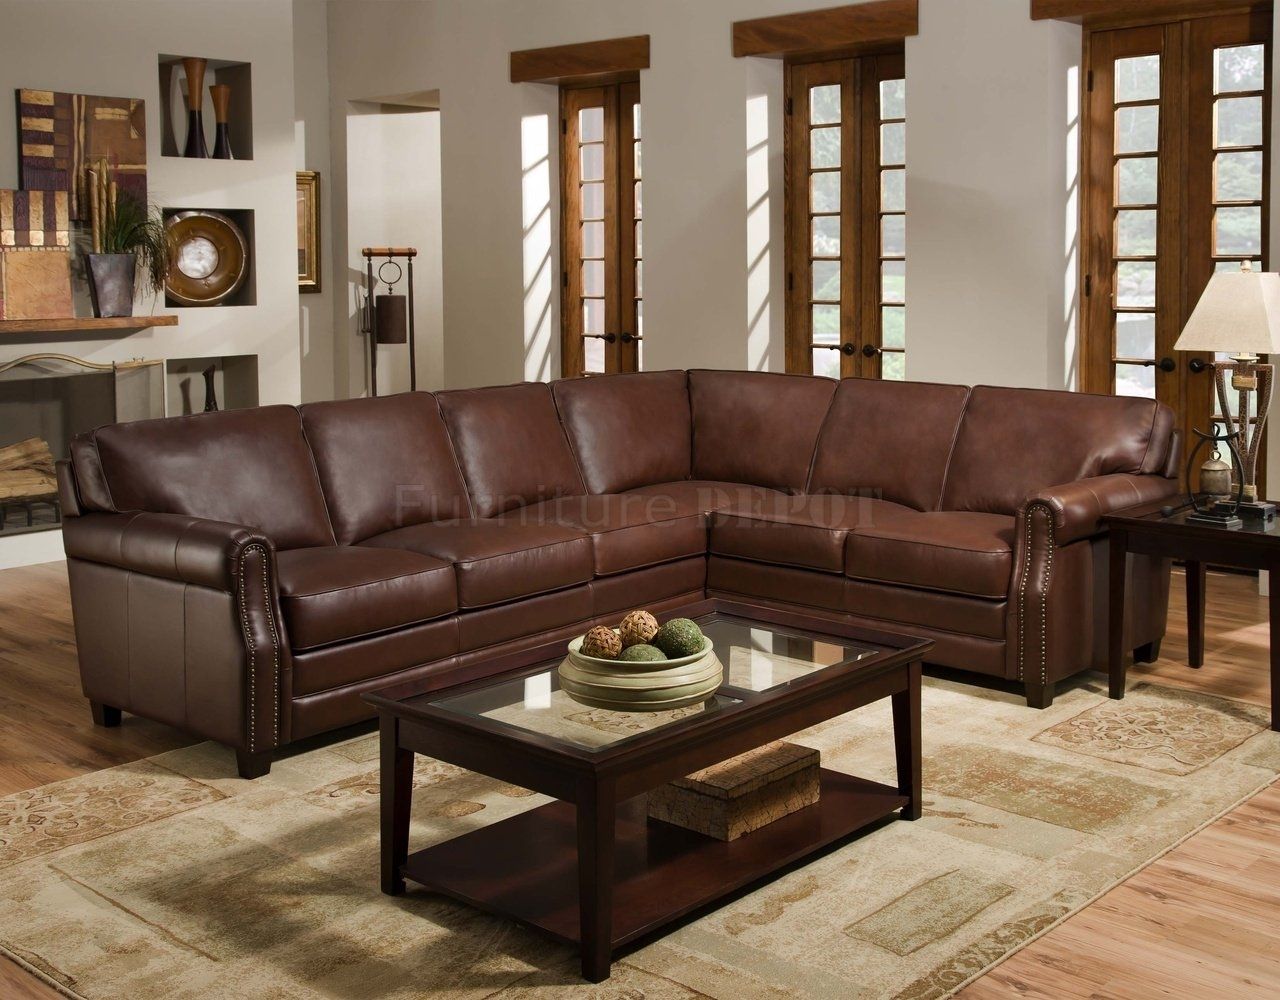 Beautiful Cheap Sectional Sofas Under 200 91 About Remodel Rooms To With Regard To Sectional Sofas Under  (View 9 of 10)